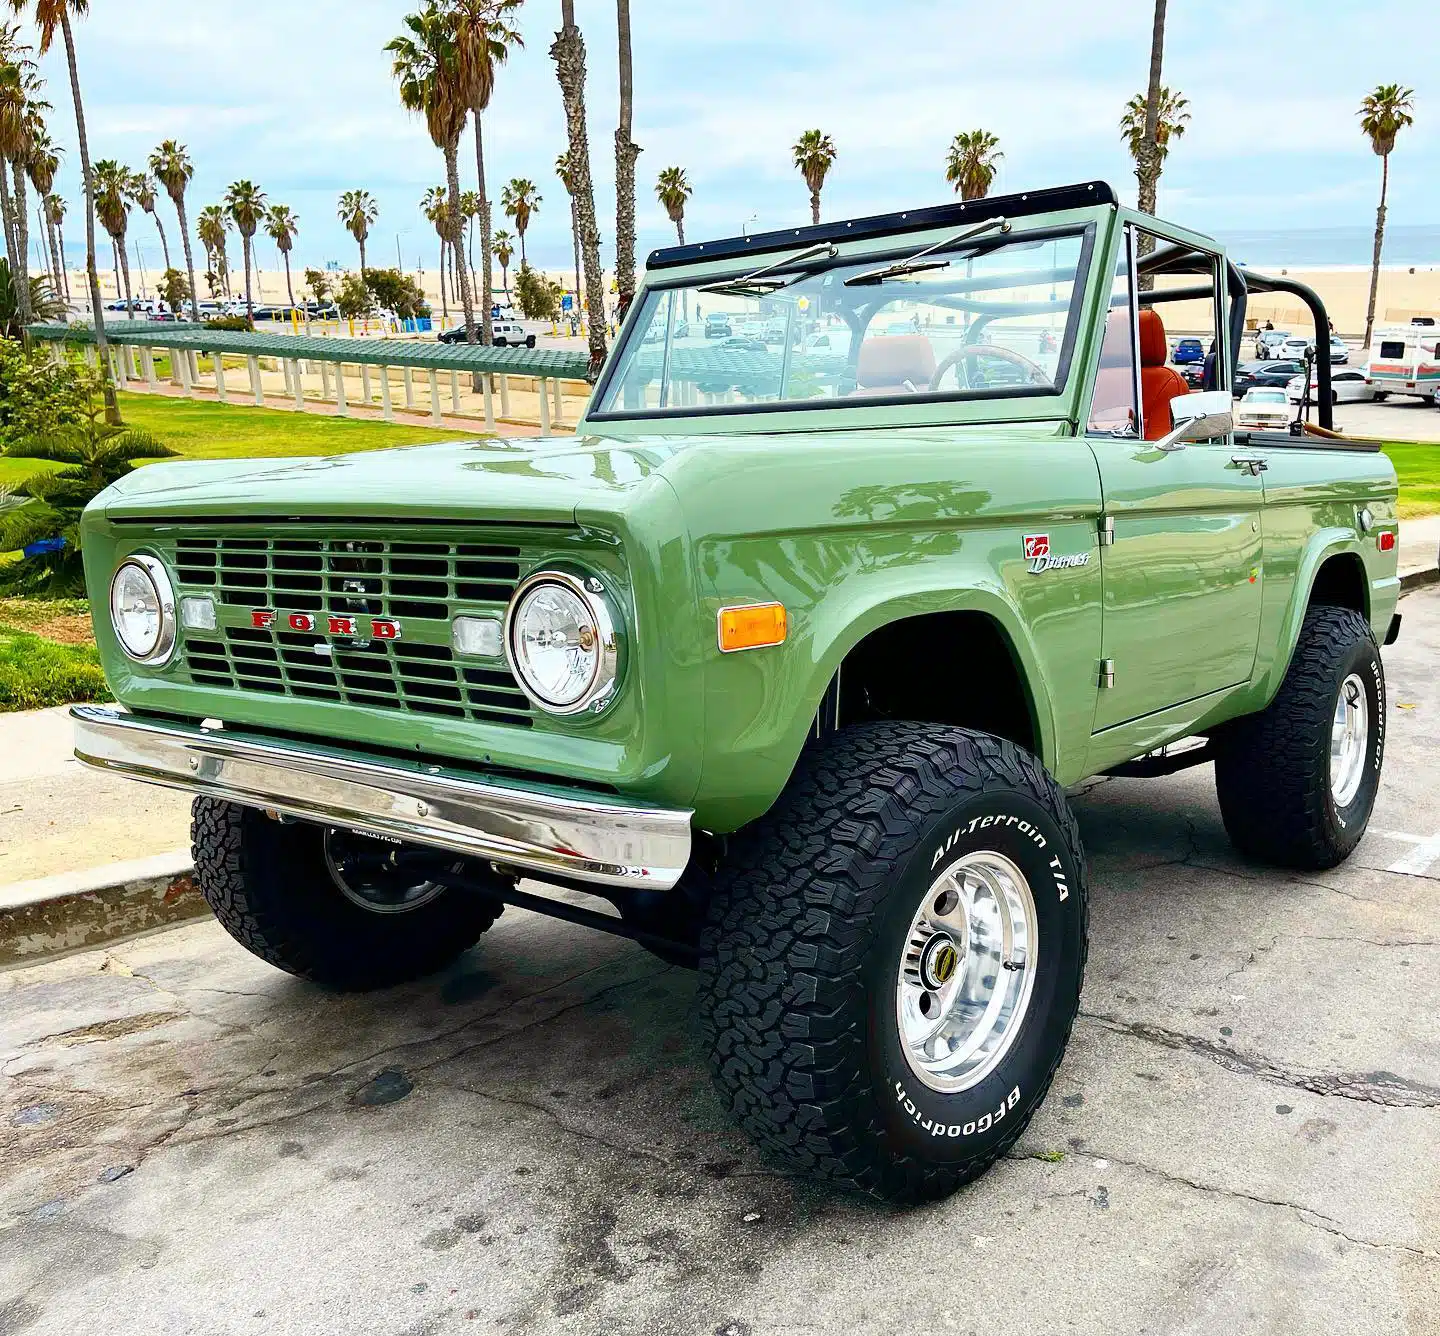 A classic first generation Ford Bronco parked by the beach